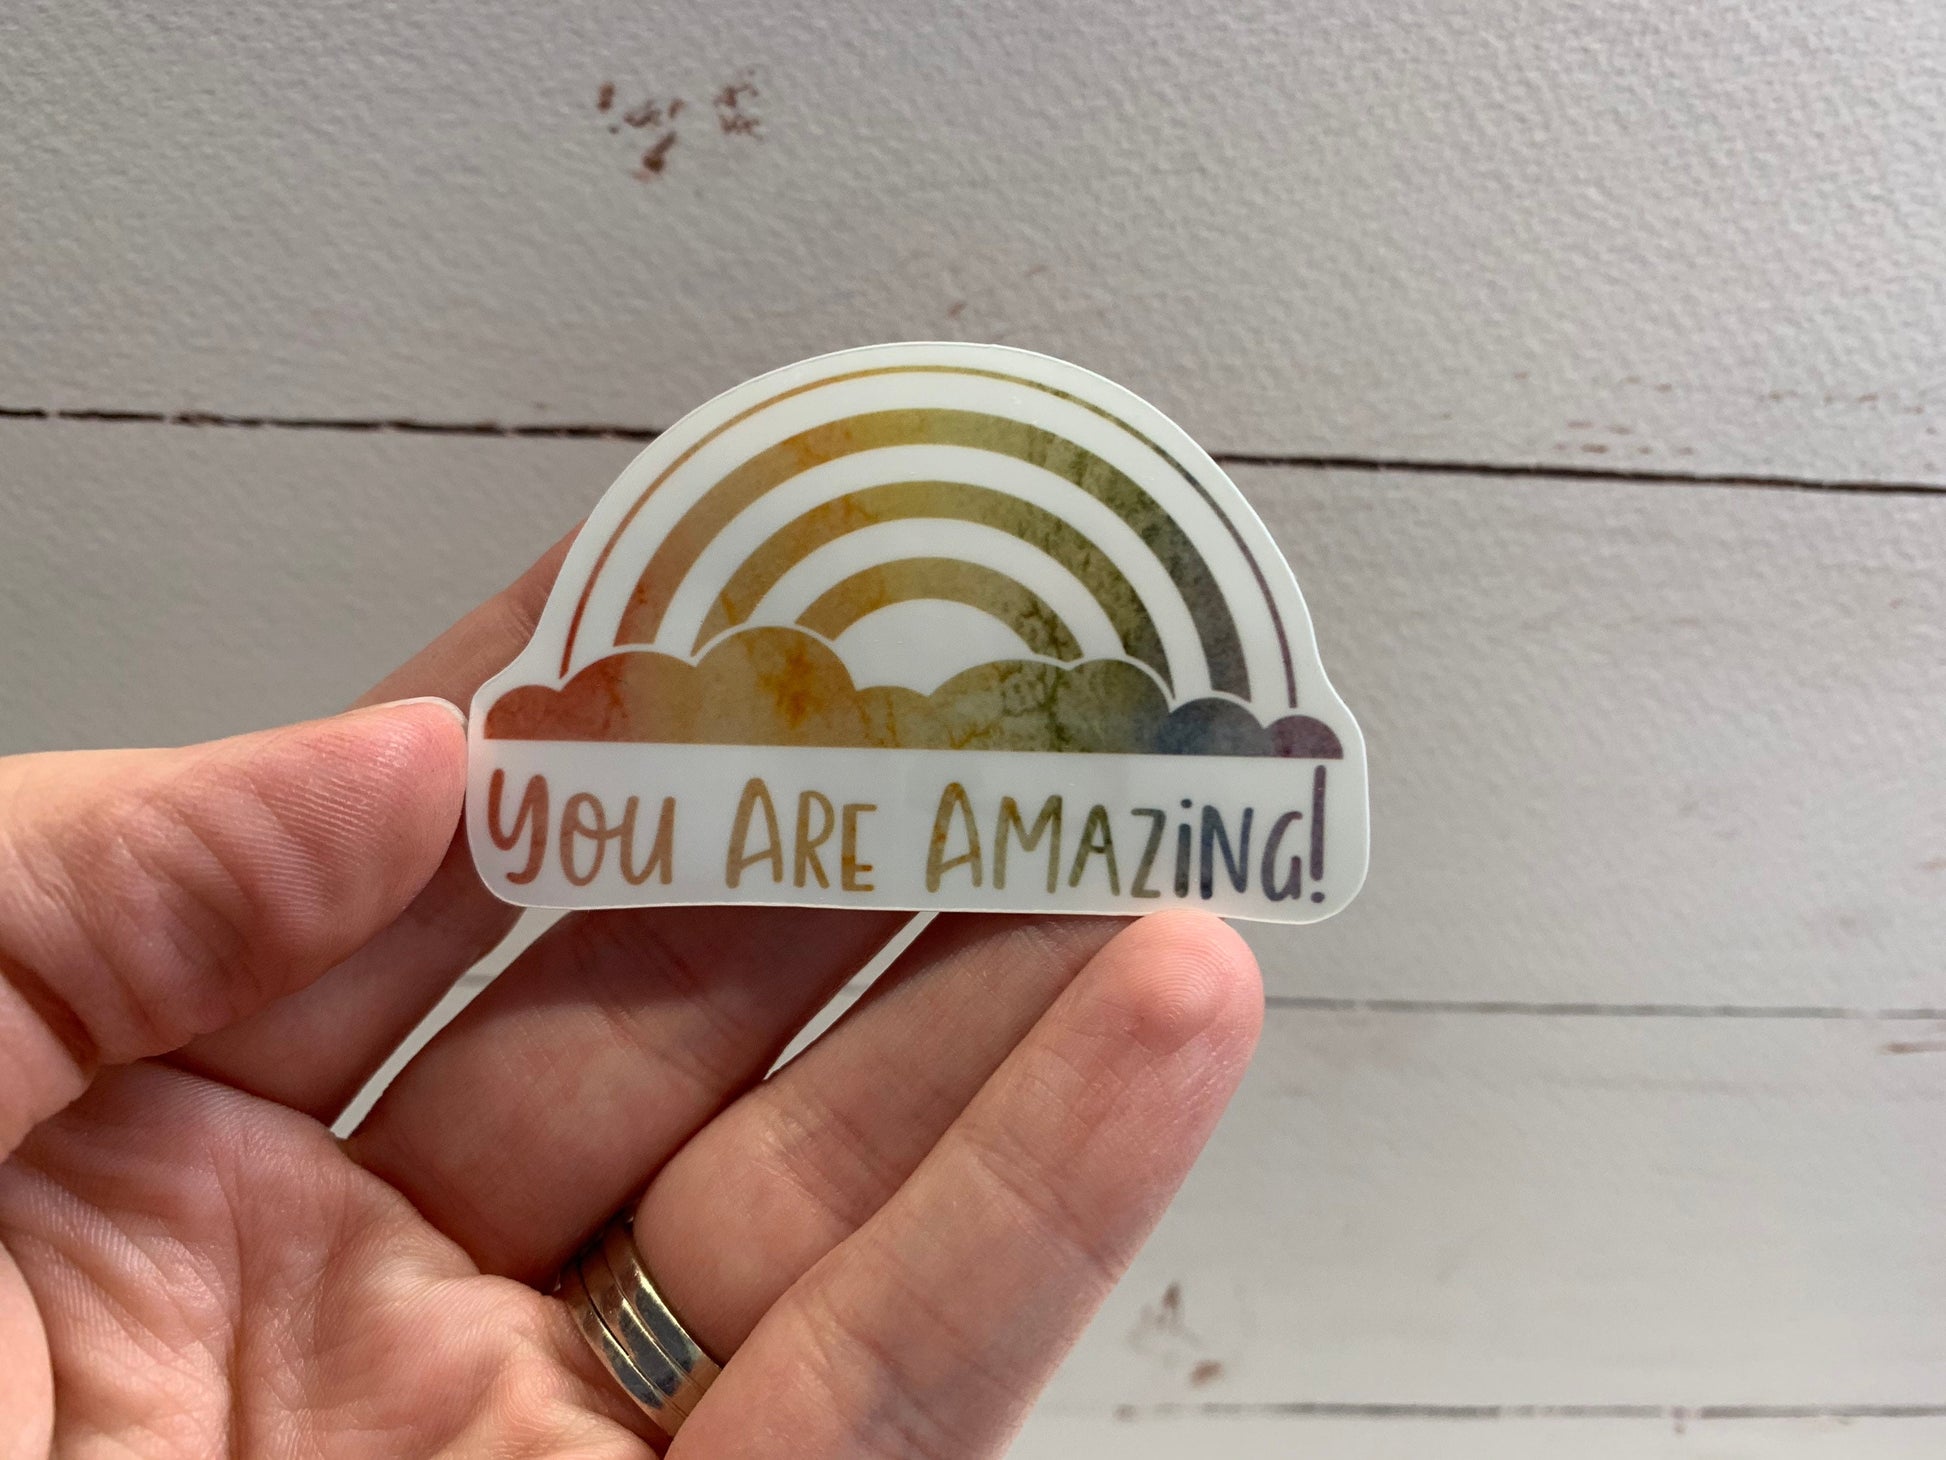 Watercolor Rainbow "You Are Amazing” Die Cut Laminated Vinyl Stickers, Sticker Collecting, Waterproof Glossy Vinyl